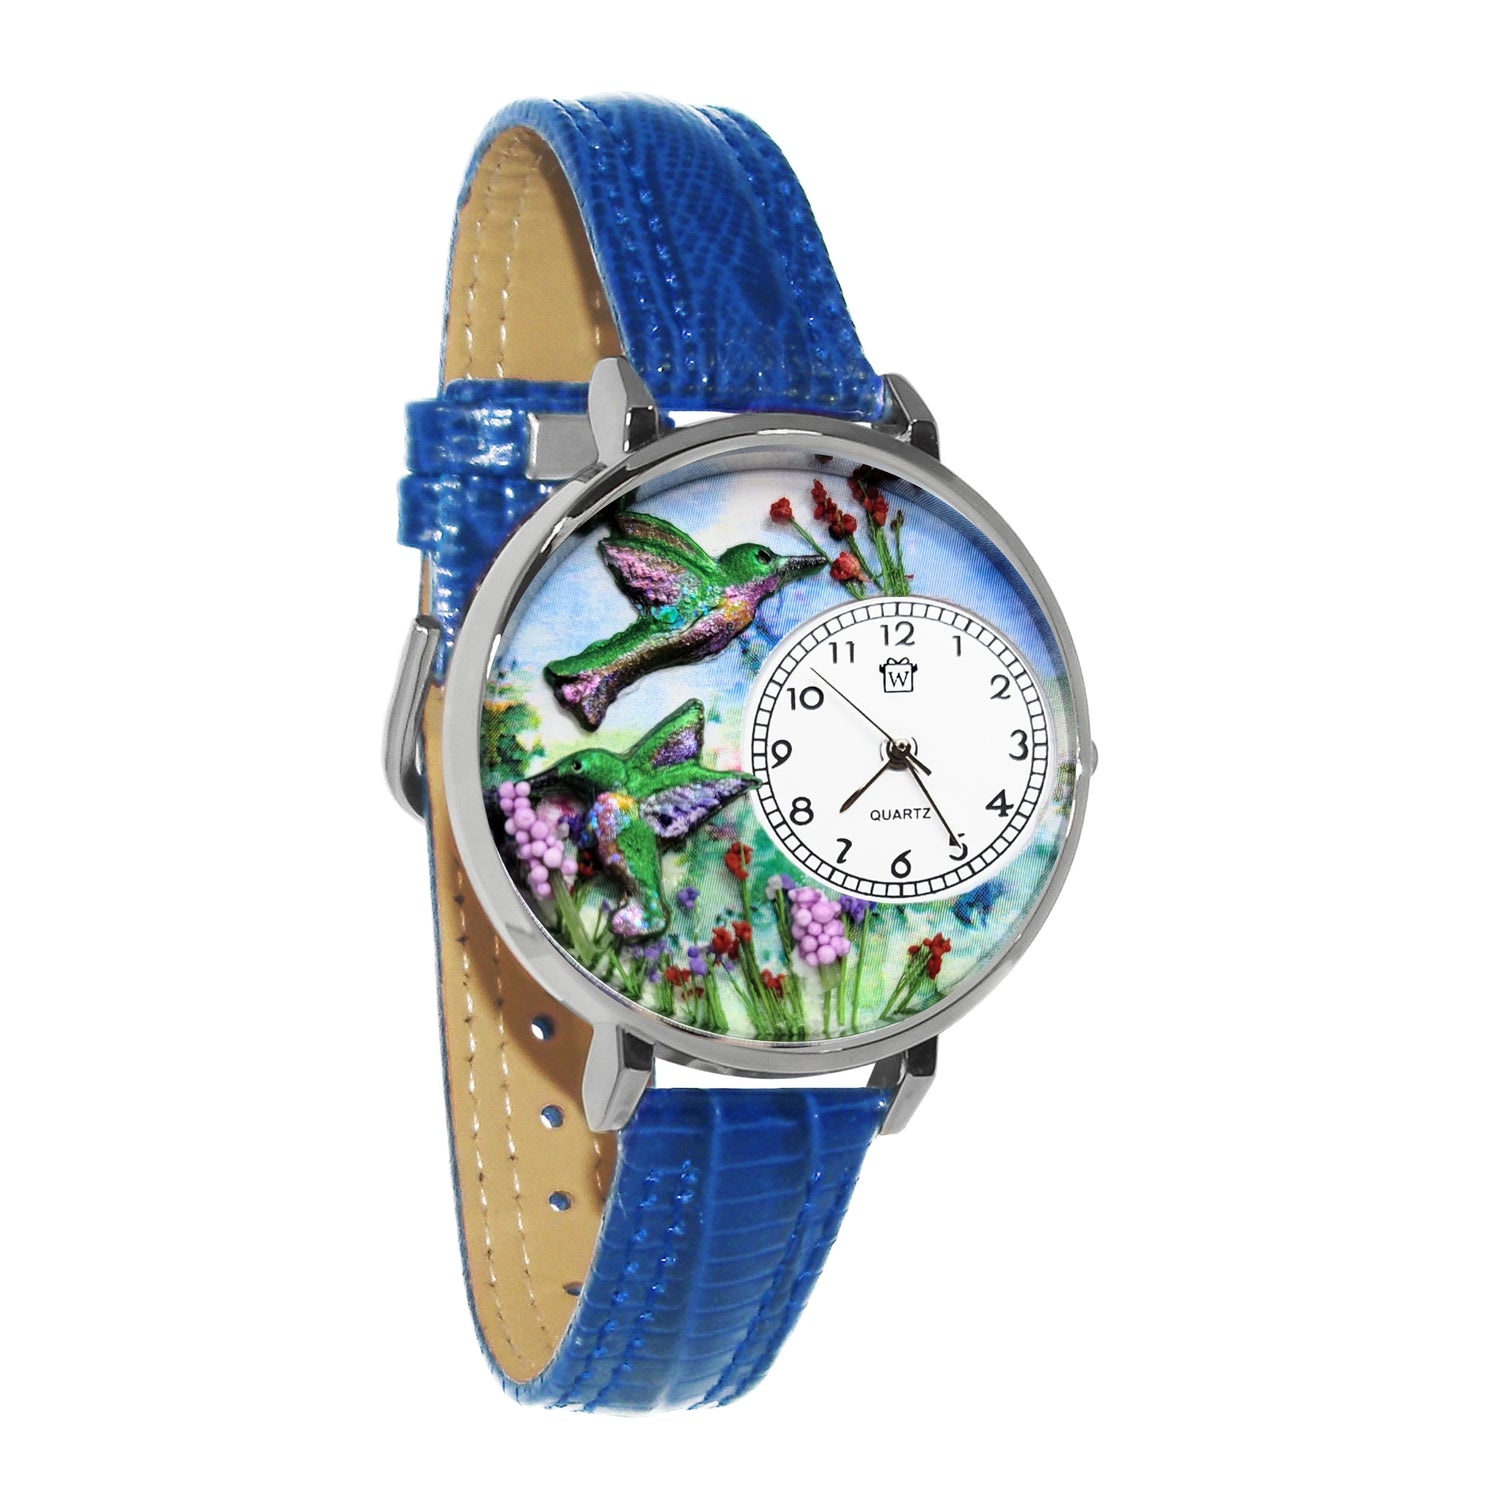 Whimsical Gifts | Hummingbirds 3D Watch Large Style | Handmade in USA | Animal Lover | Outdoor & Garden | Novelty Unique Fun Miniatures Gift | Silver Finish Royal  Blue Leather Watch Band